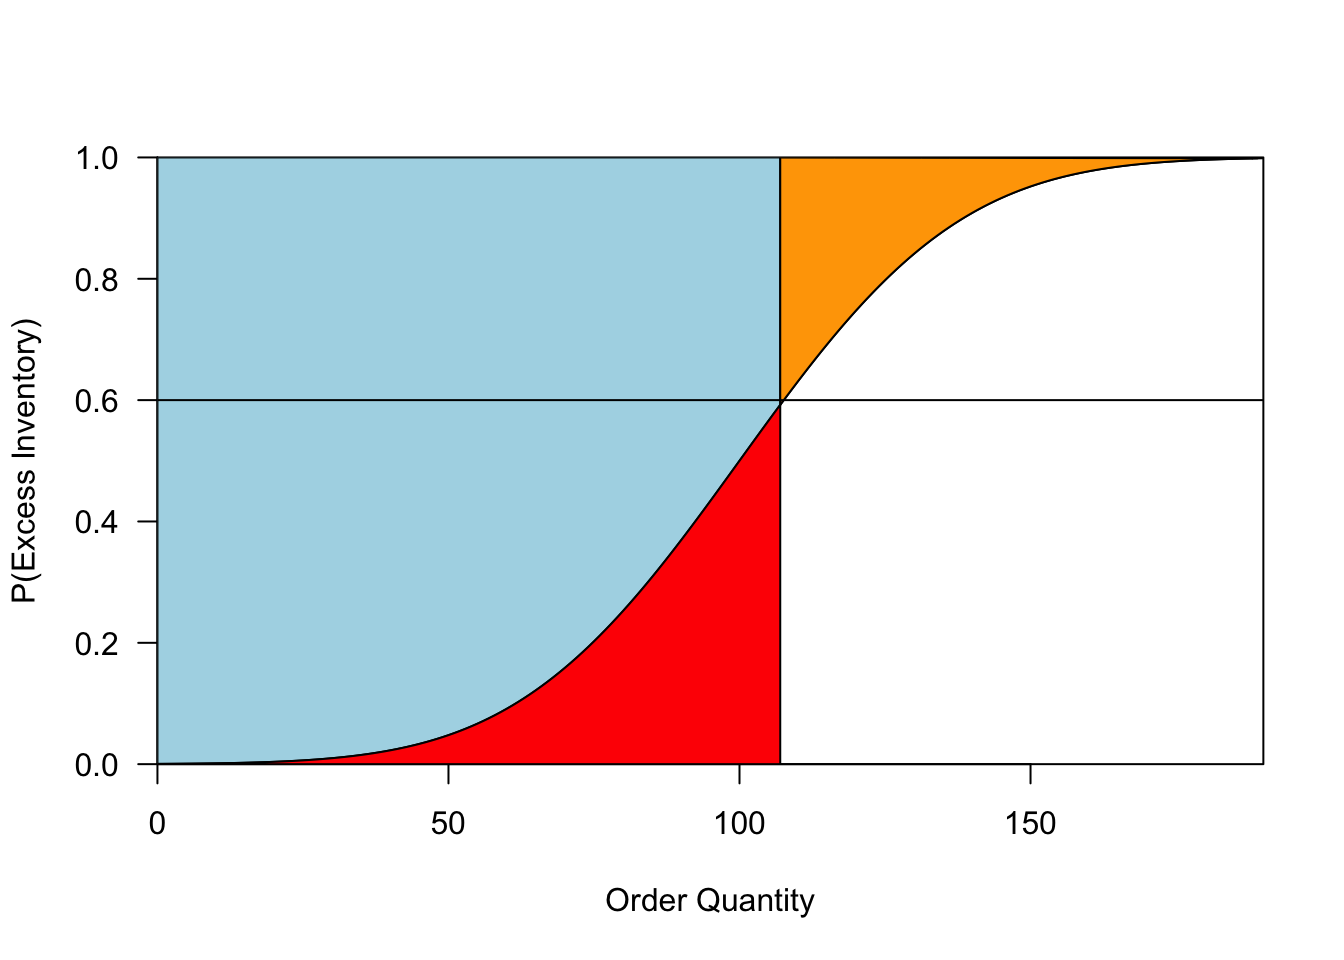 A visualization of the classical newsvendor problem. The curve represents the CDF of the demand distribution. The vertical line gives our order quantity. The blue region represents expected sales, and the red and orange regions represent expected overage and underage, respectively. The horizontal line shows our critical ratio: the optimal order quantity is where this line intersects the demand distribution.